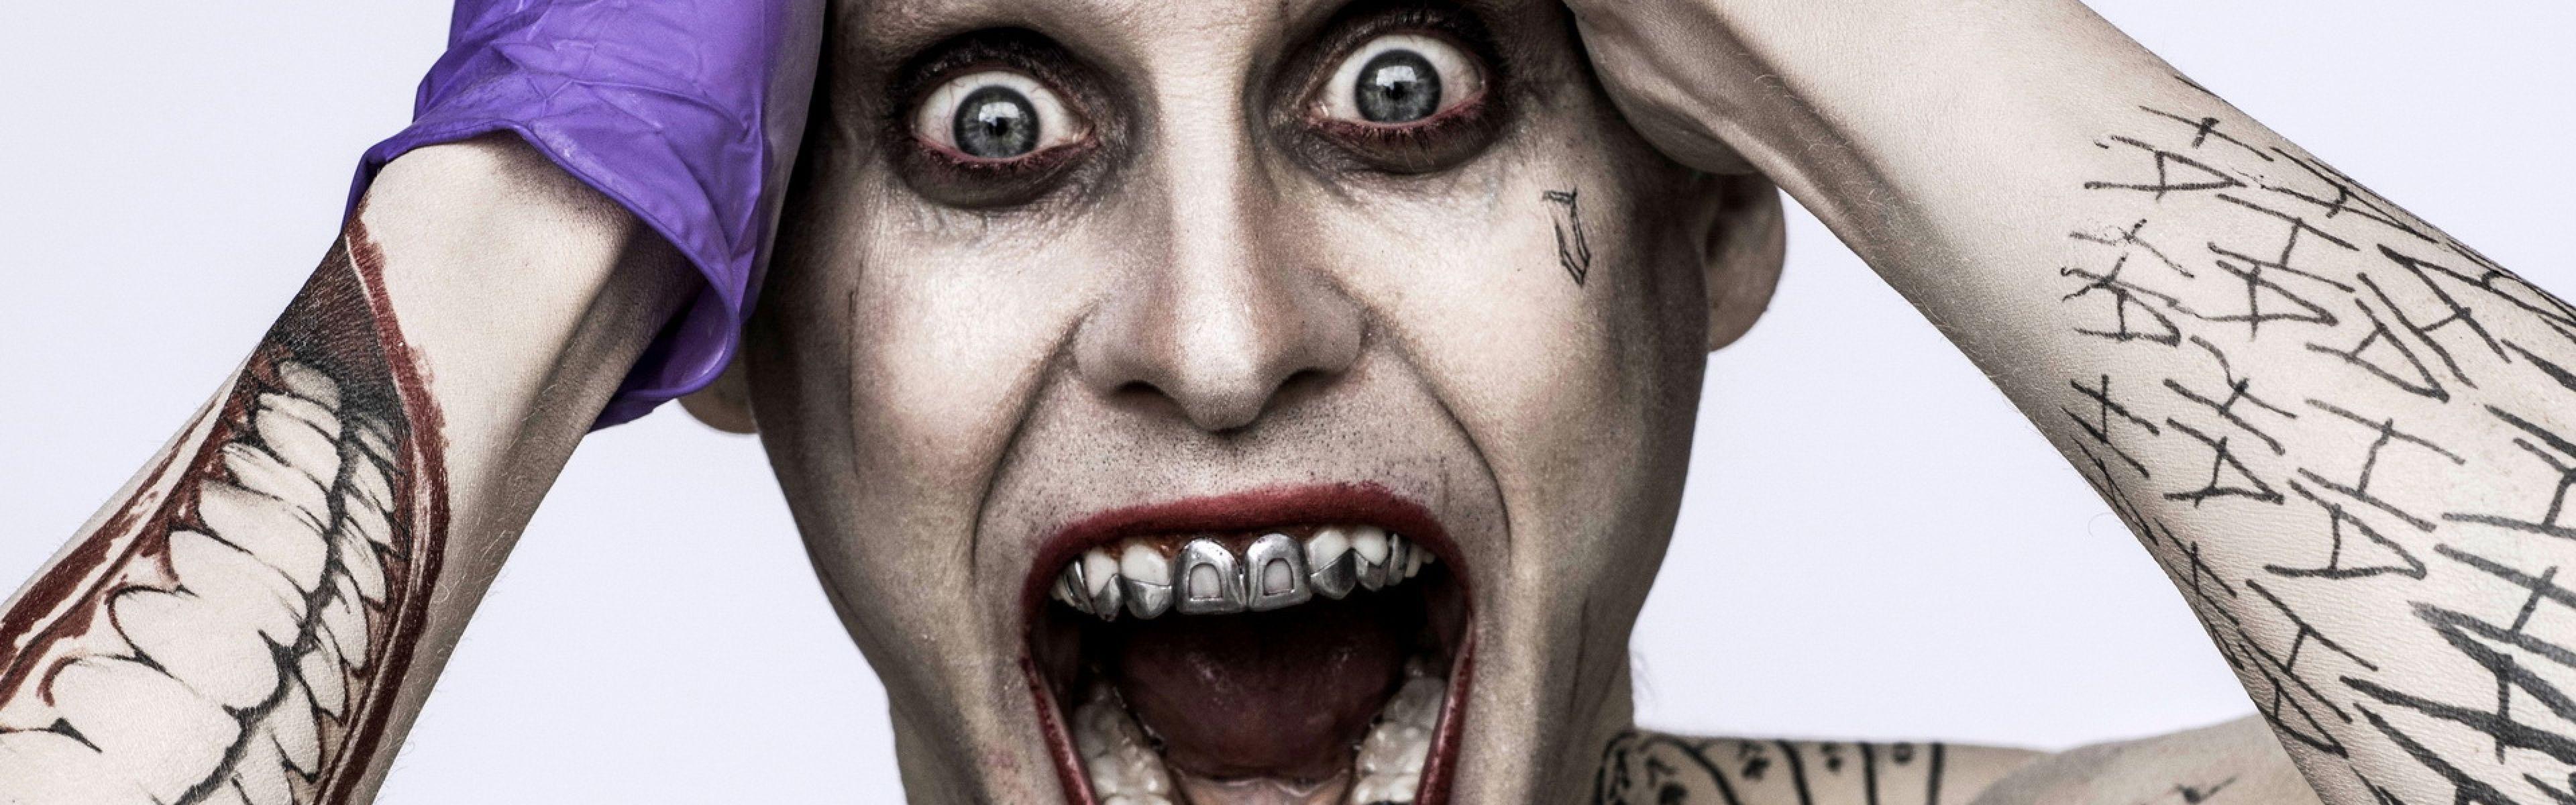 Download Wallpapers 3840x1200 Suicide squad, Joker, Jared leto Dual